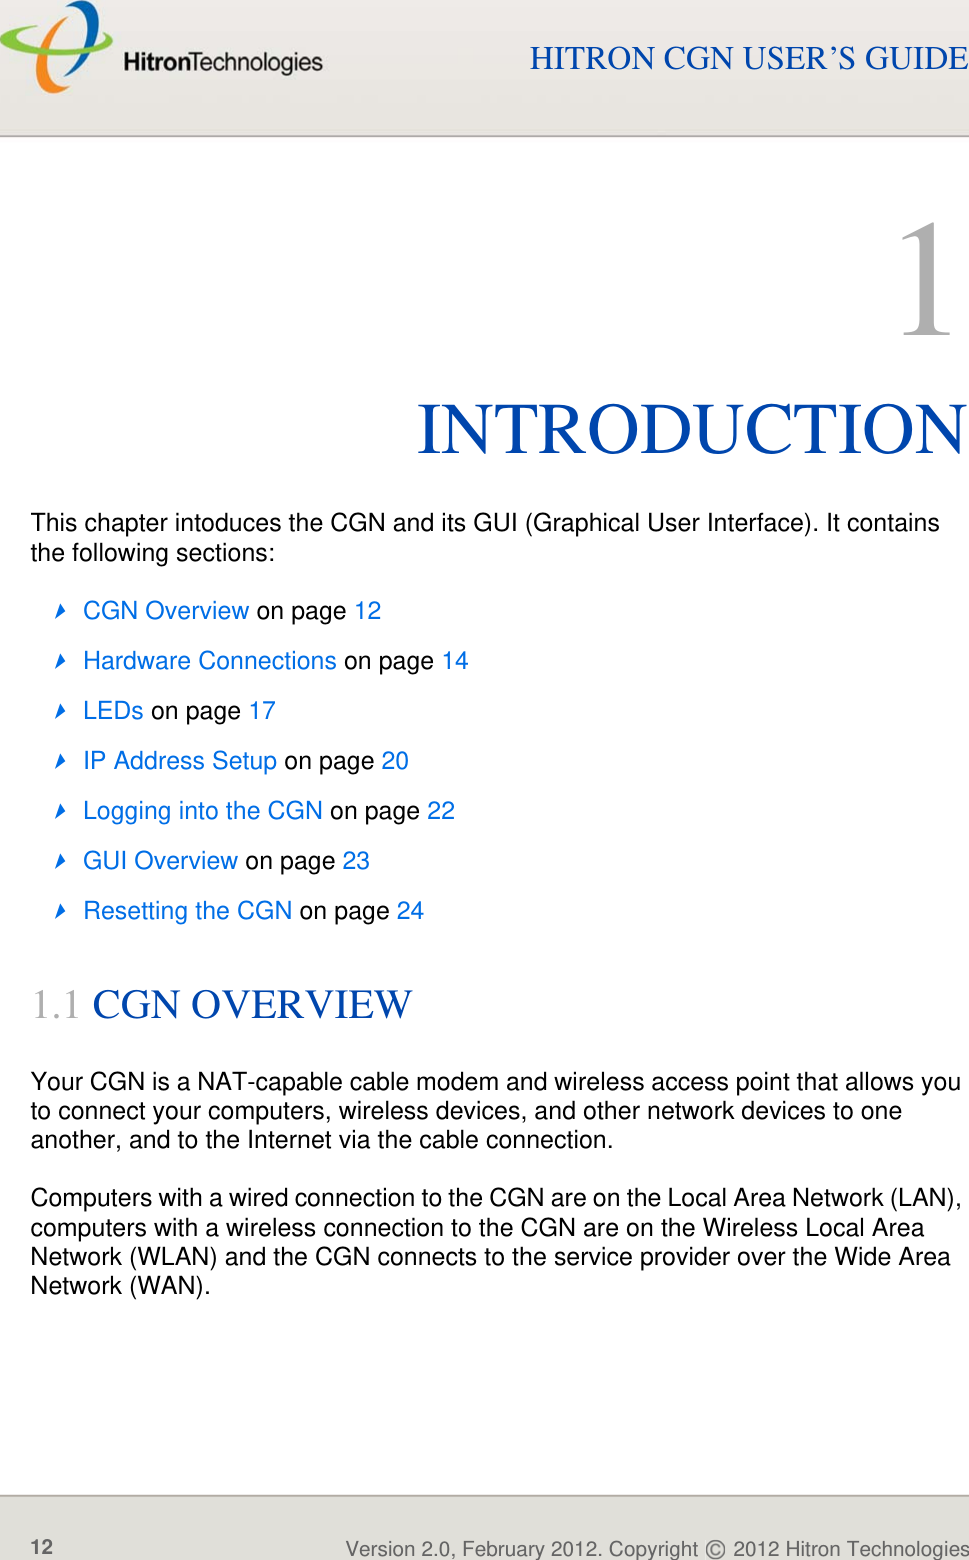 INTRODUCTIONVersion 2.0, February 2012. Copyright   2012 Hitron Technologies12HITRON CGN USER’S GUIDE1INTRODUCTIONThis chapter intoduces the CGN and its GUI (Graphical User Interface). It contains the following sections:CGN Overview on page 12Hardware Connections on page 14LEDs on page 17IP Address Setup on page 20Logging into the CGN on page 22GUI Overview on page 23Resetting the CGN on page 241.1 CGN OVERVIEWYour CGN is a NAT-capable cable modem and wireless access point that allows you to connect your computers, wireless devices, and other network devices to one another, and to the Internet via the cable connection.Computers with a wired connection to the CGN are on the Local Area Network (LAN), computers with a wireless connection to the CGN are on the Wireless Local Area Network (WLAN) and the CGN connects to the service provider over the Wide Area Network (WAN).